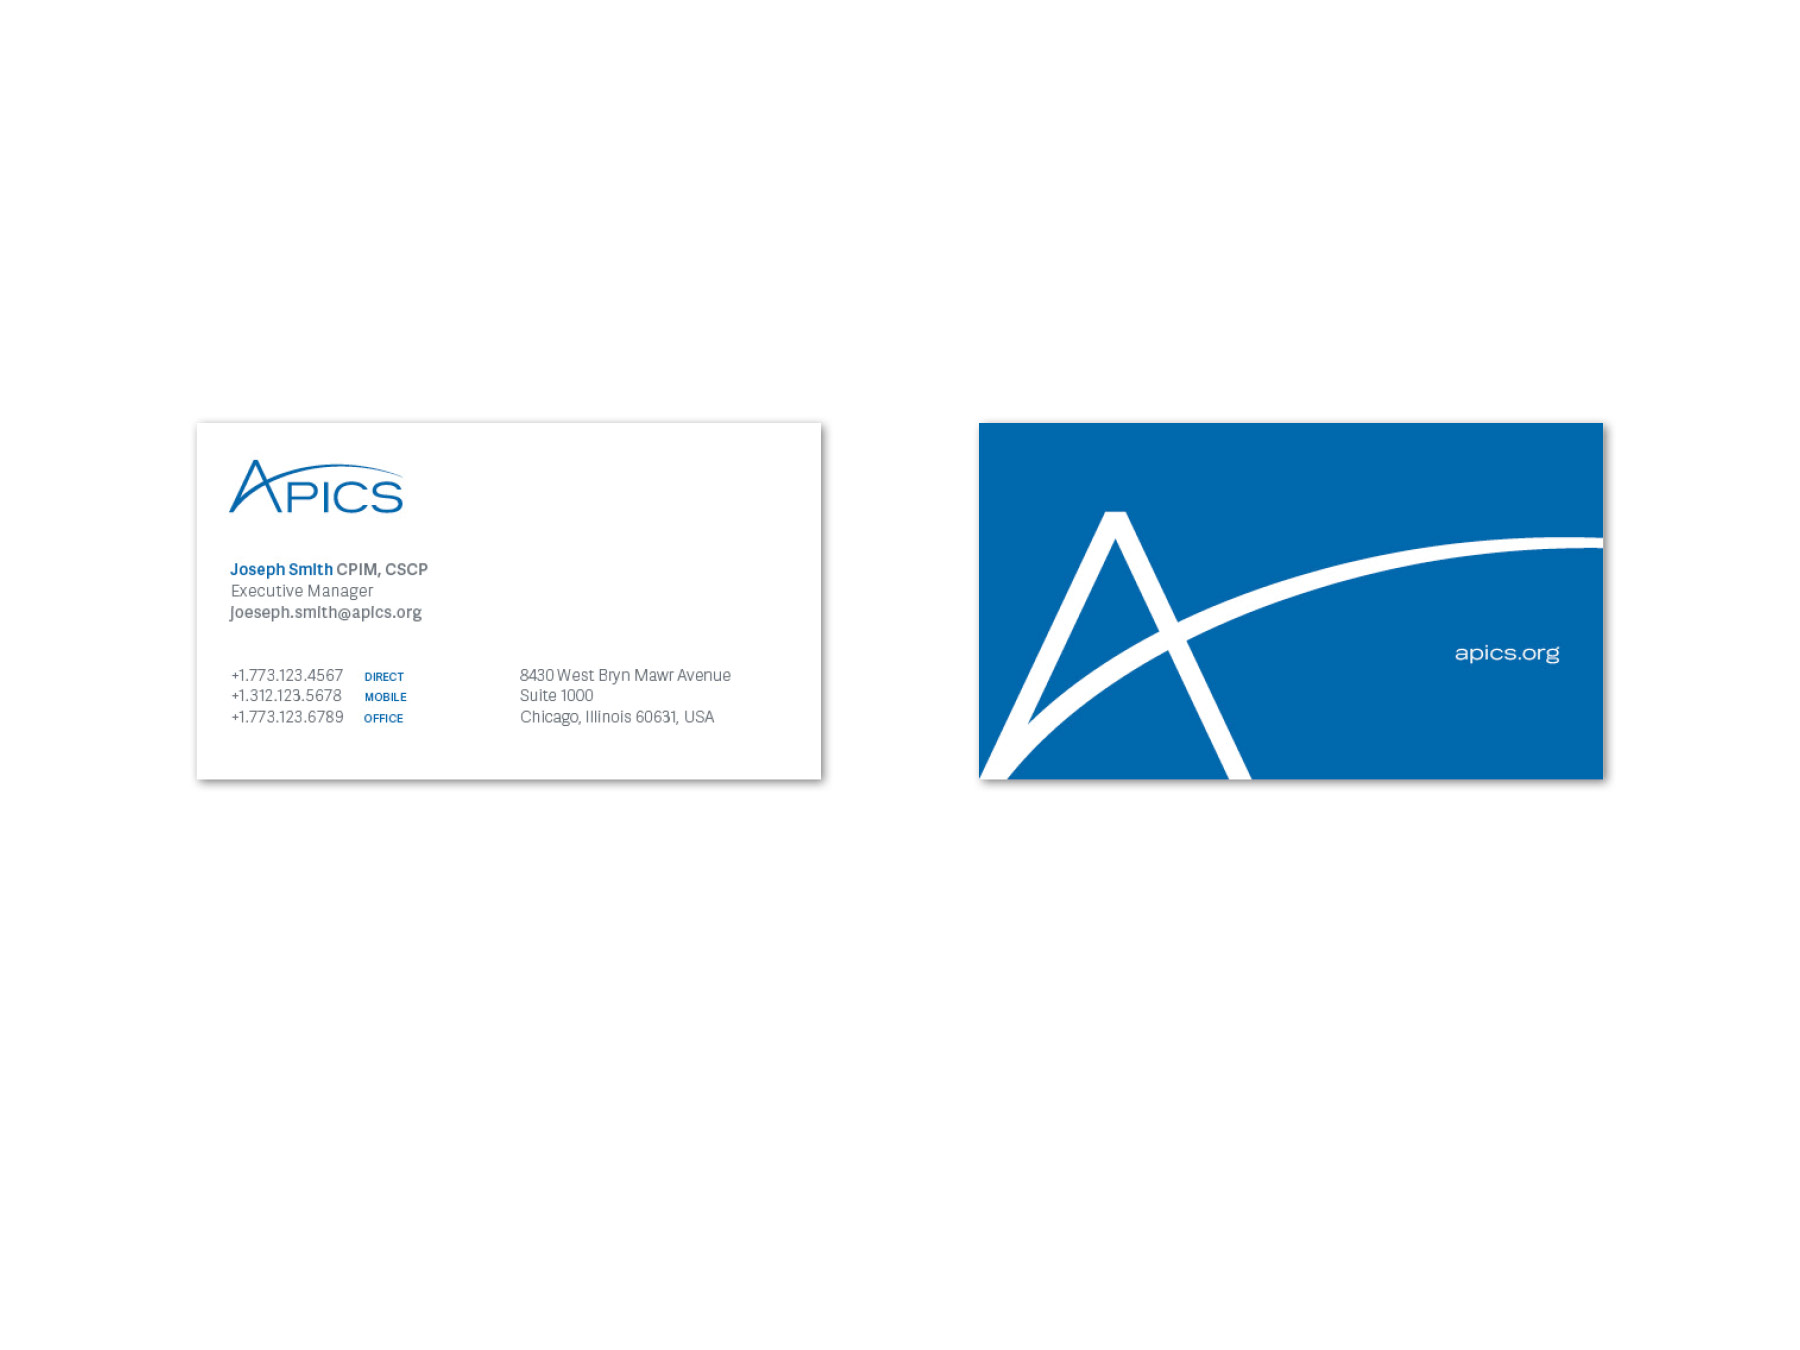  The rebranded APICS business card. 